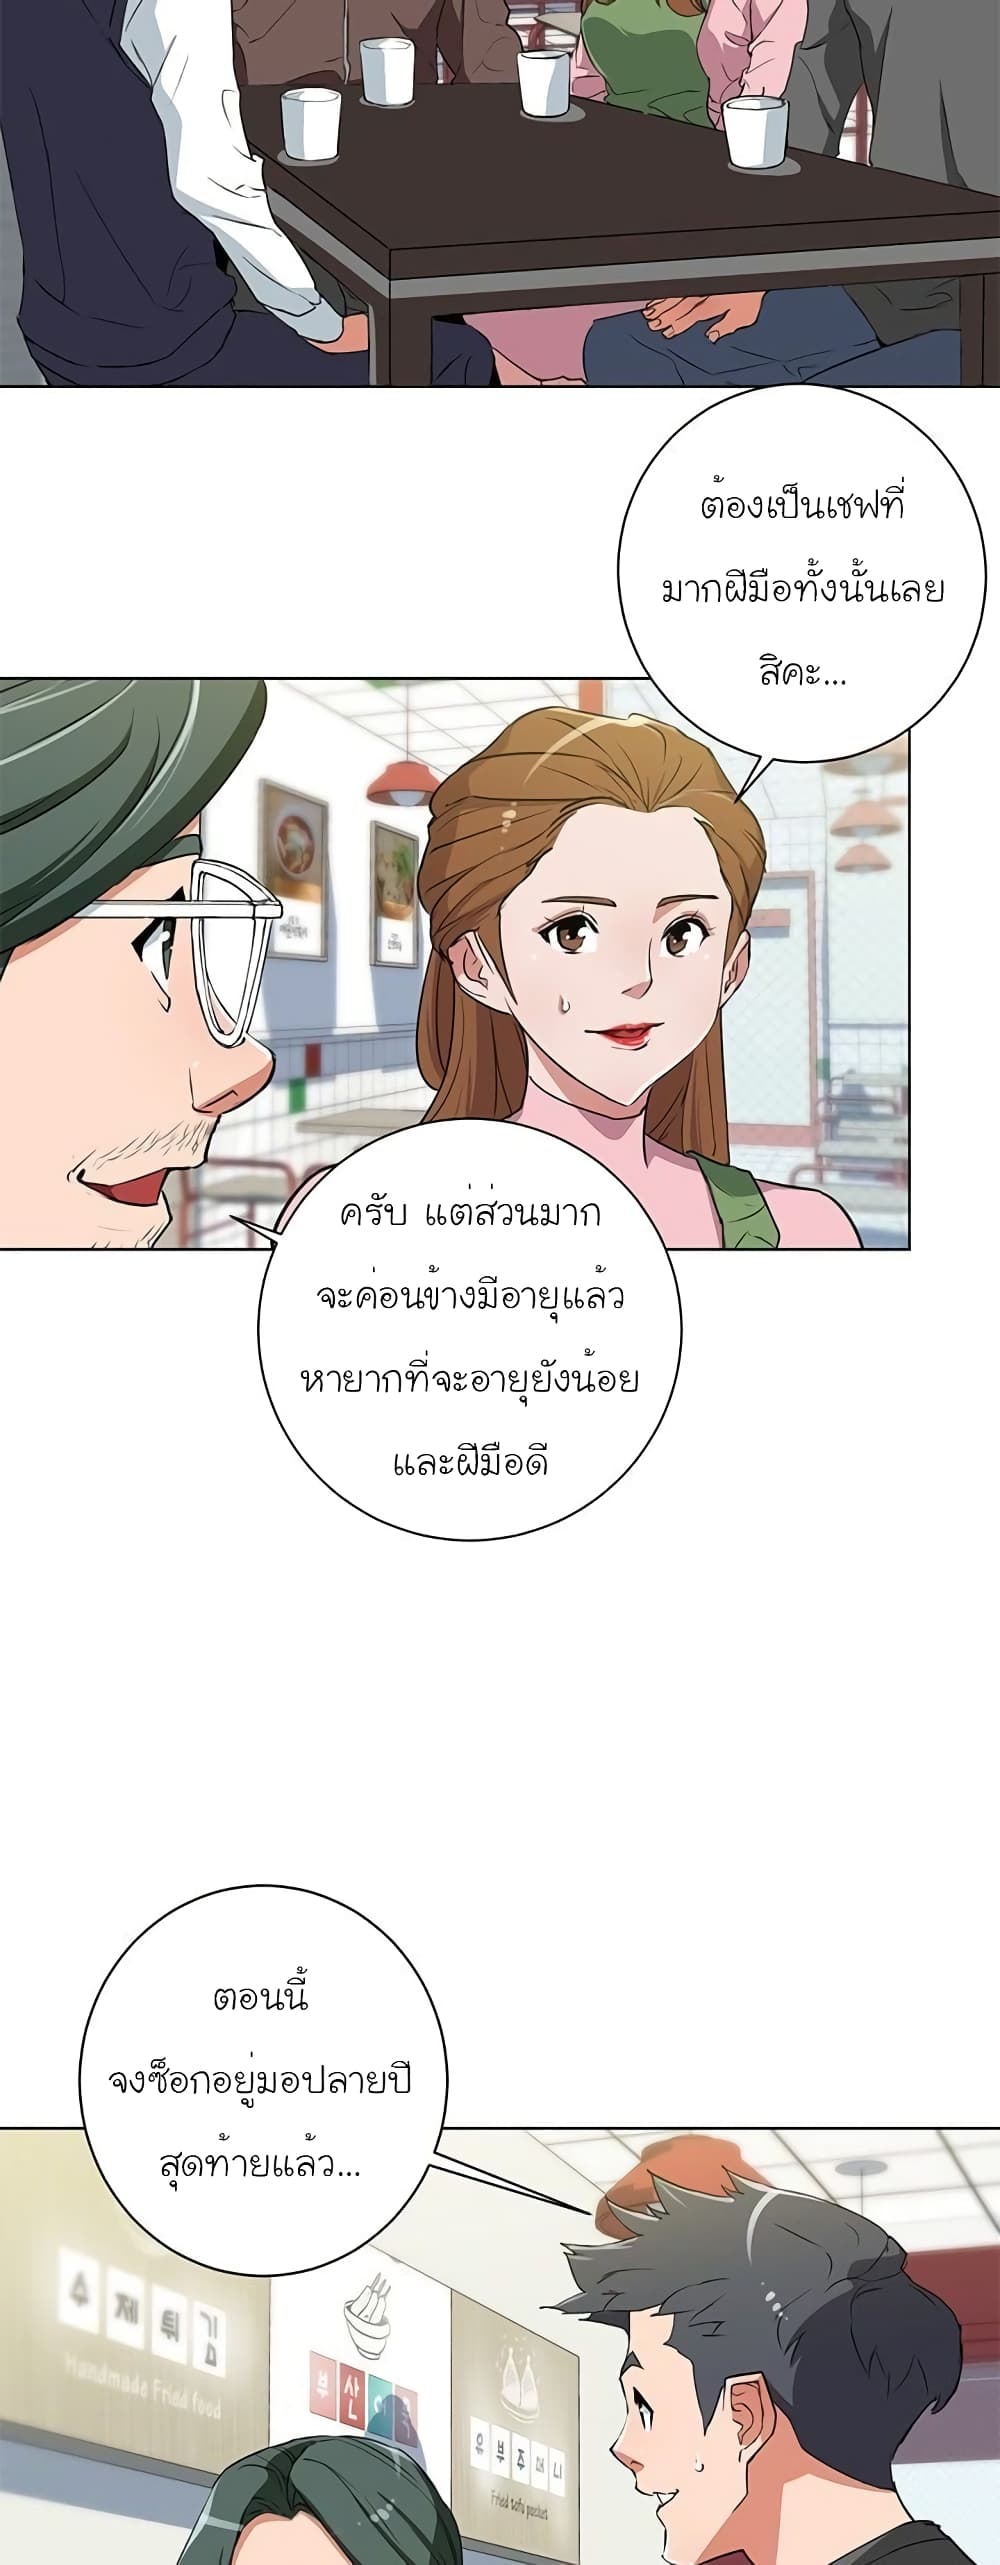 I Stack Experience Through Reading Books ตอนที่ 31 (6)